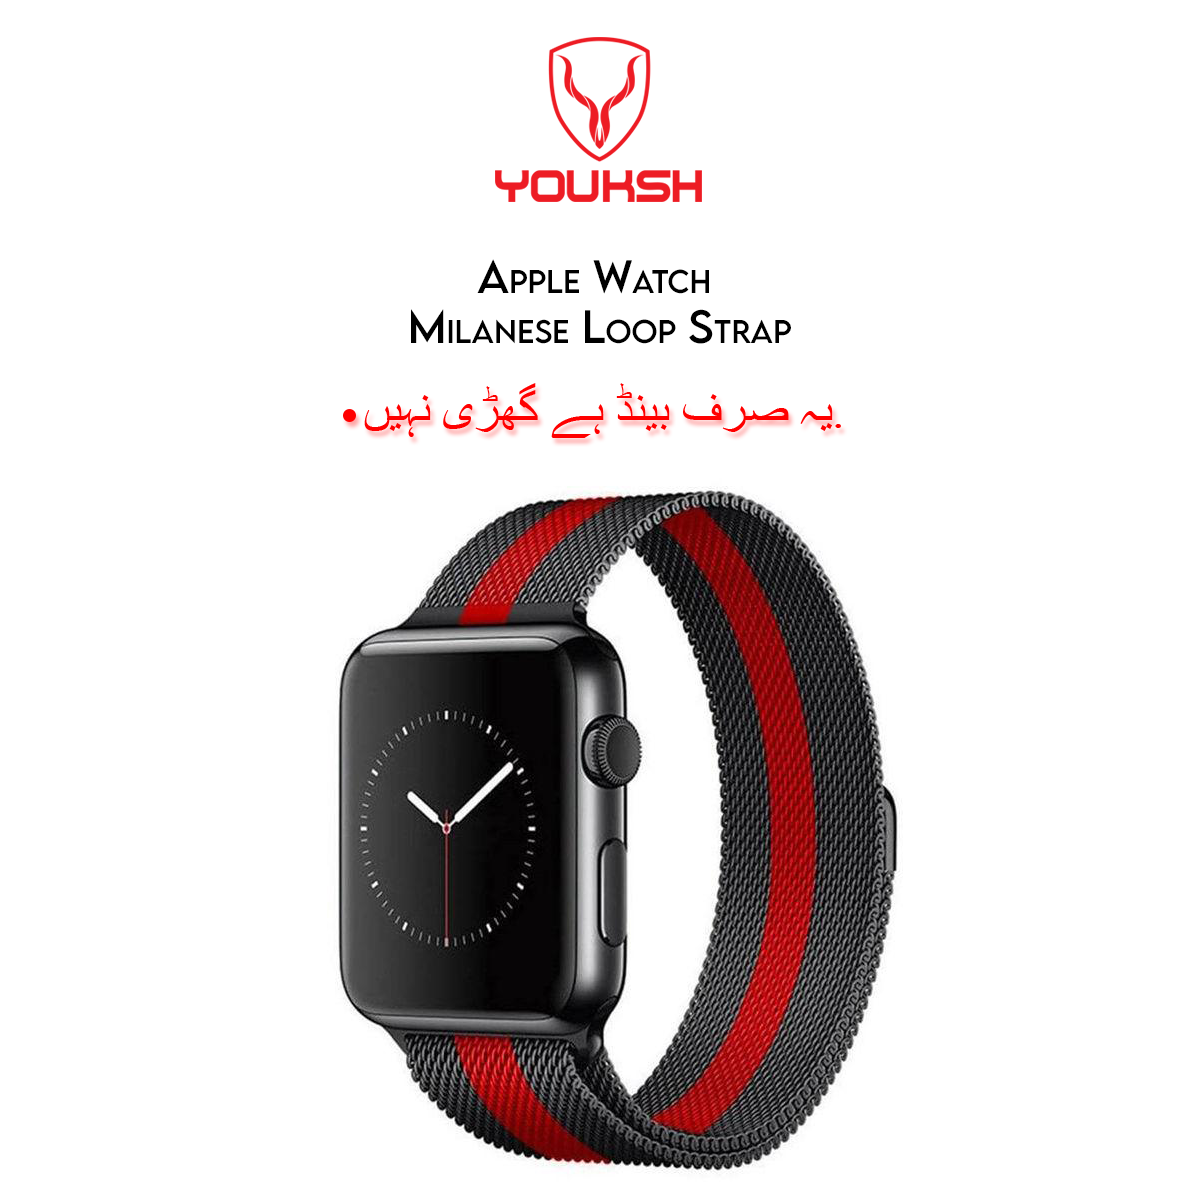 YOUKSH Apple Watch - Milanese Dual tone - Stainless Steel Strap - 42mm/44mm, For Apple Watch Series 1/2/3/4/5/6.